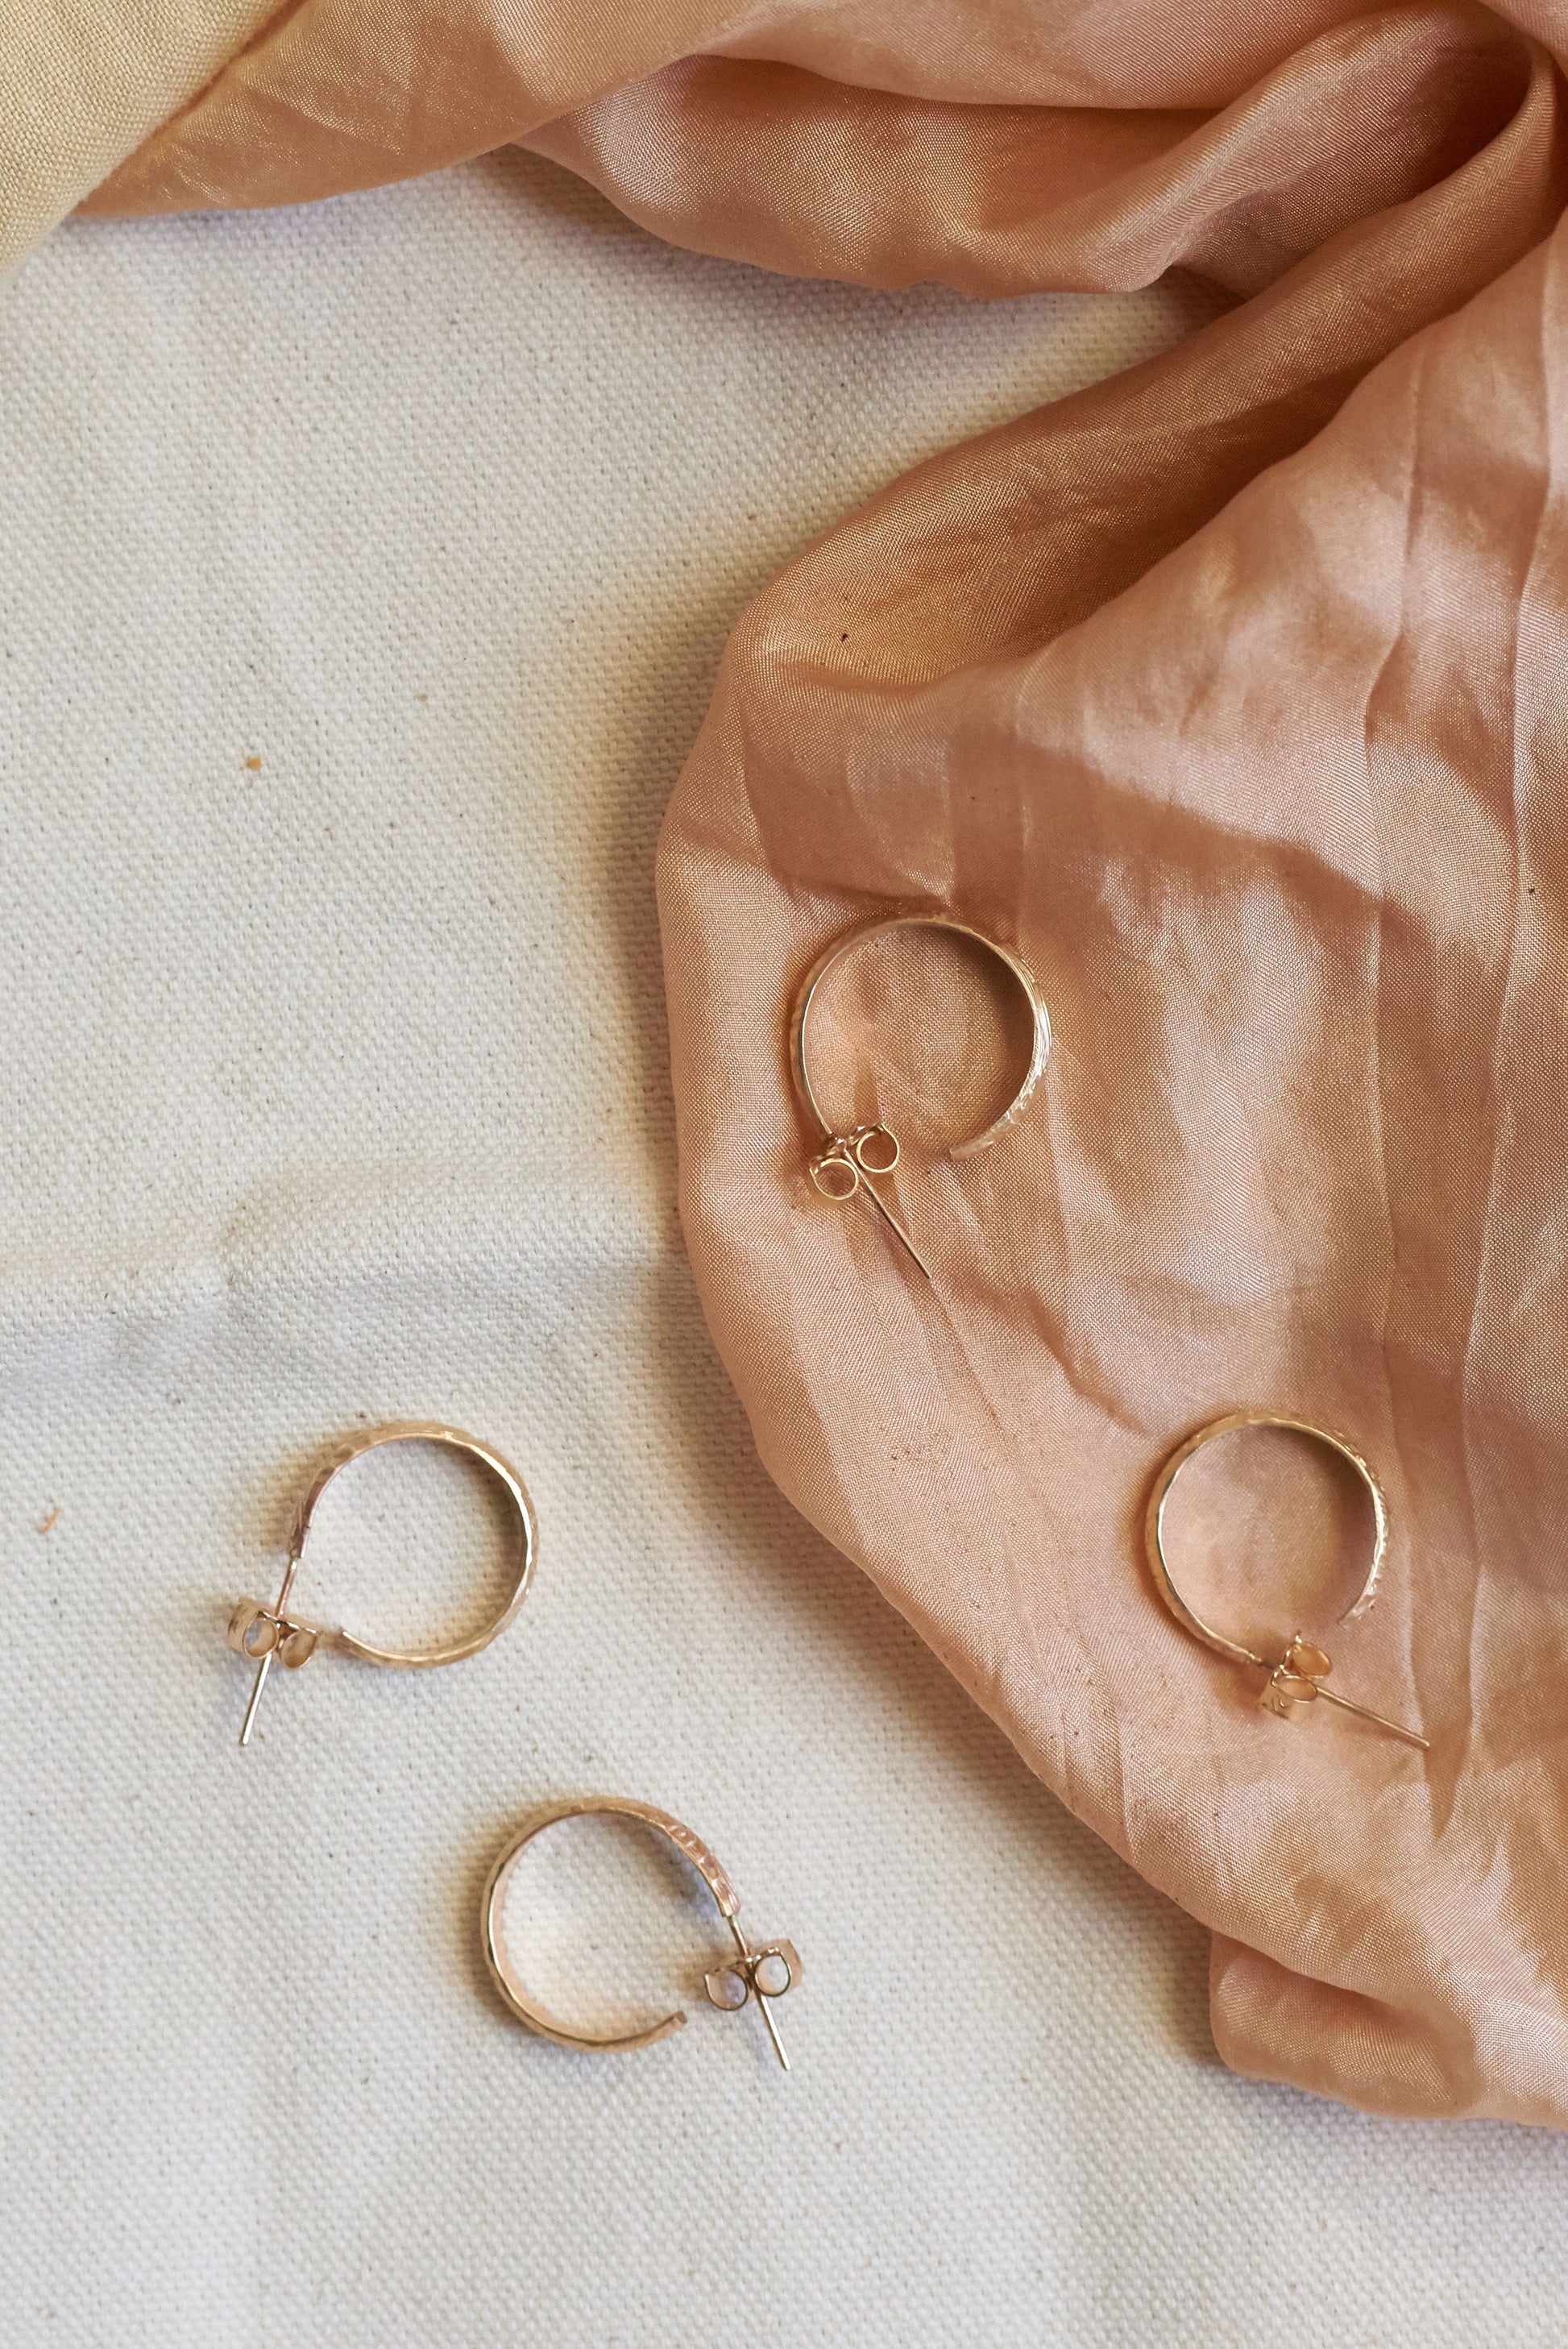 14k Gold Filled hoops with engraved floral details. Photo by Molly Gilholm